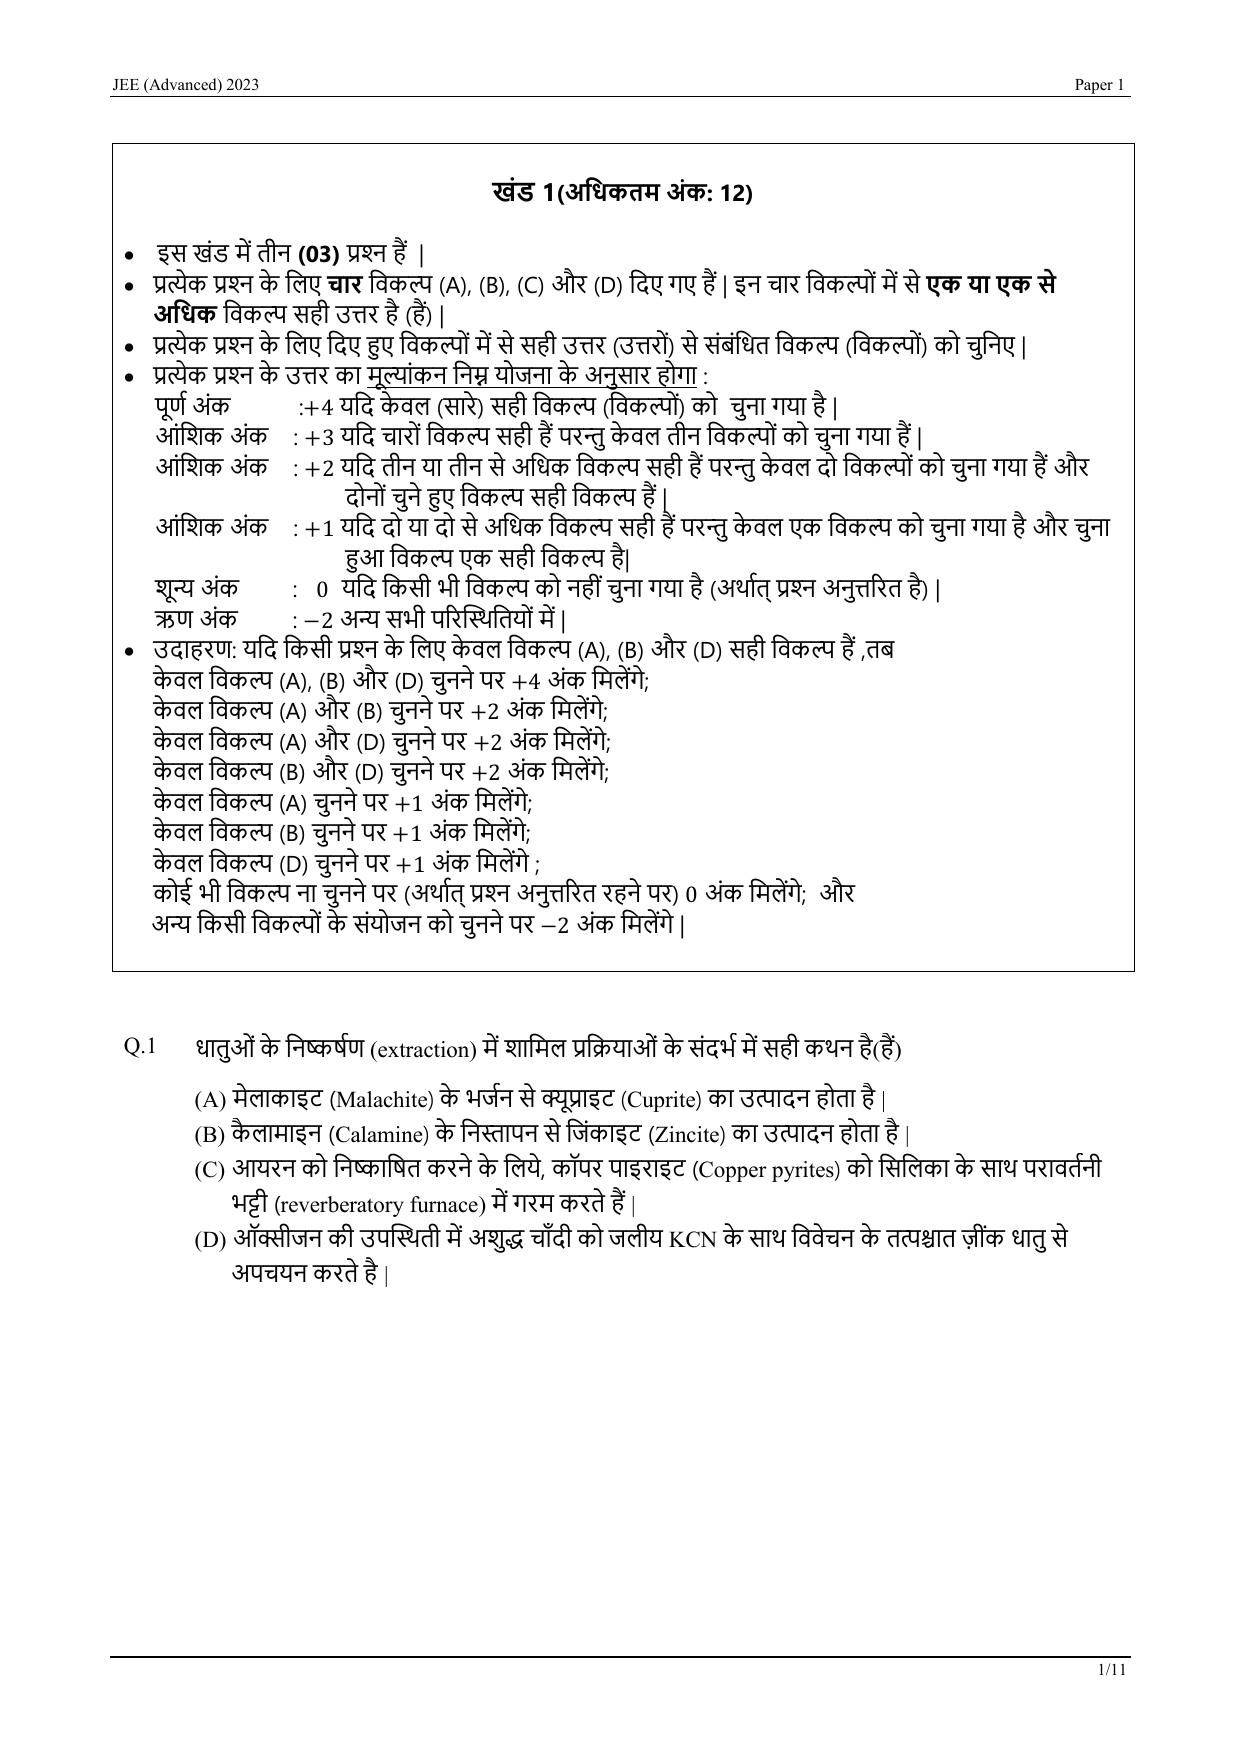 JEE Advanced 2023 Question Paper 1 (Hindi) - Page 21